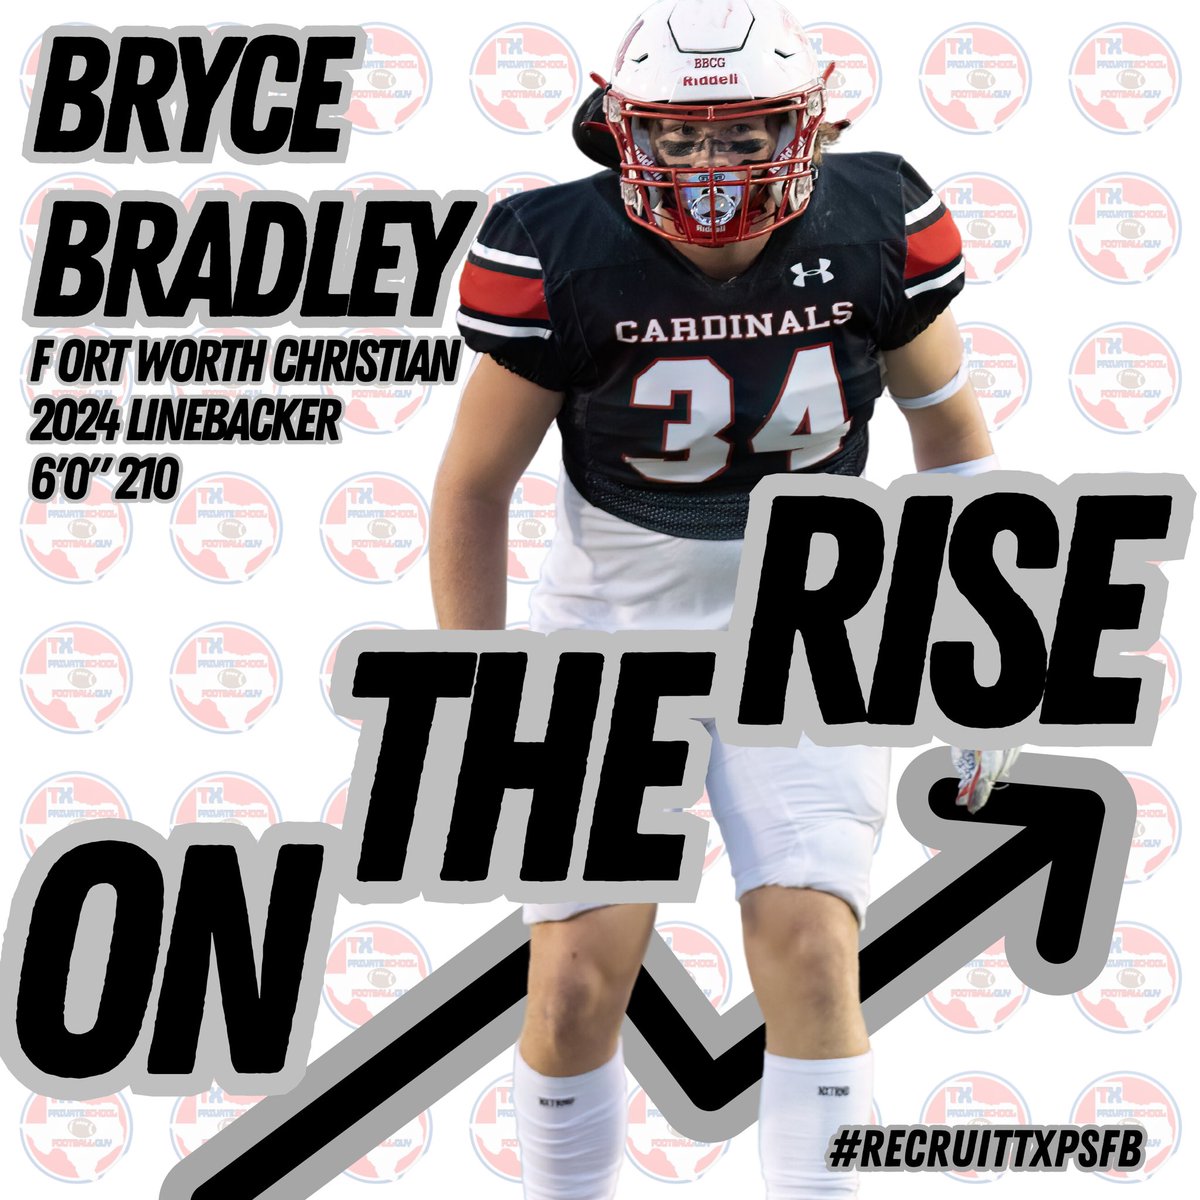 🚨On The Rise🚨 Bryce Bradley - @brycebradley6 2024 LB/FB - @FWC_CardinalFB 6’0” 210 3.7 GPA Bradley will be a 4 year varsity starter and is know as one of the best defensive players in TXPSFB. Bradley is also a solid fullback/H-back prospect! hudl.com/video/3/145461…